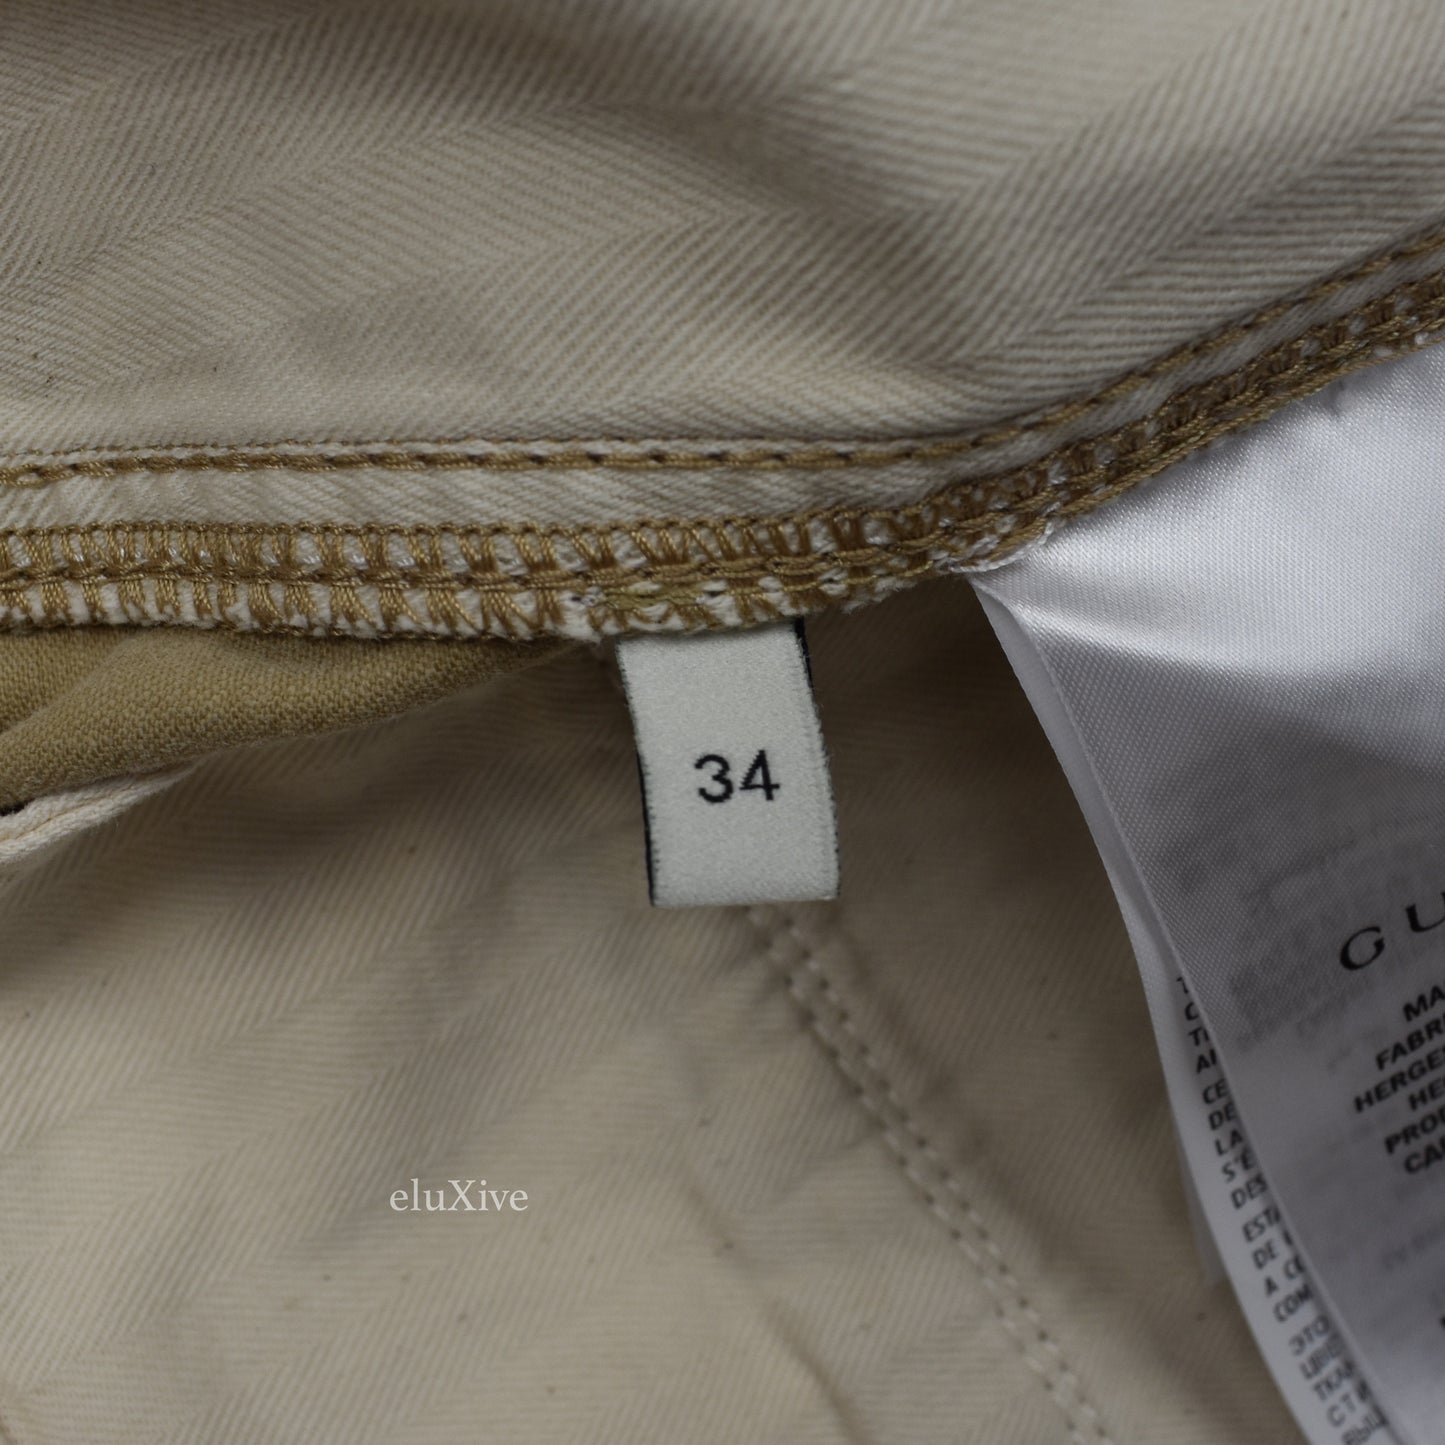 Gucci - Dragron Embroidered Chino Pants (Beige)